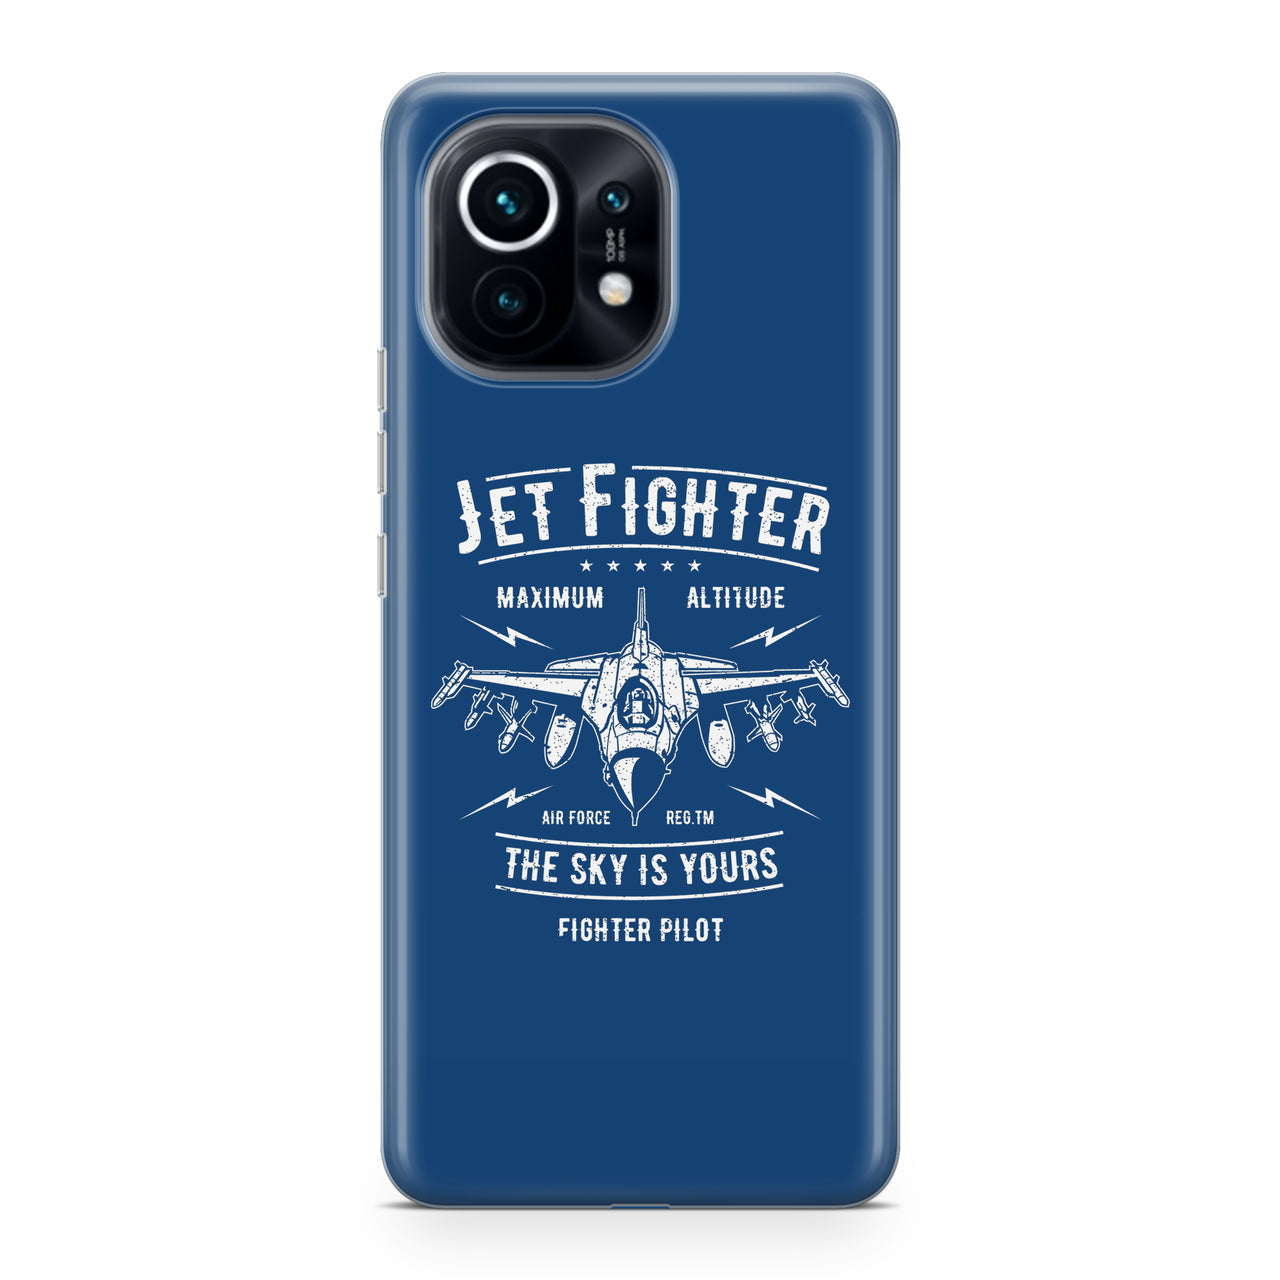 Jet Fighter - The Sky is Yours Designed Xiaomi Cases